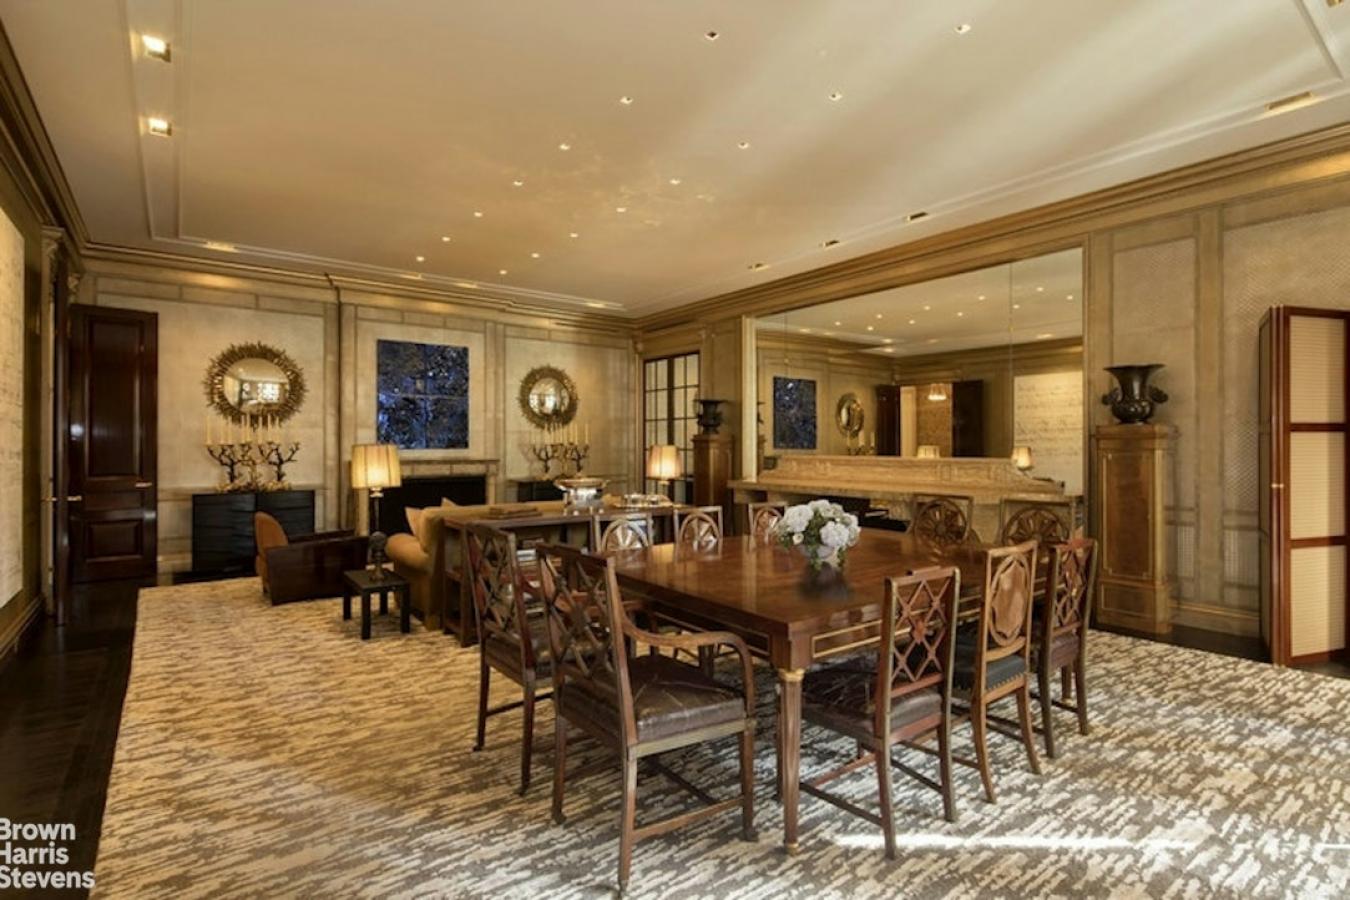 4 EAST 66TH STREET, New York, New York, 10065, United States, 5 Bedrooms Bedrooms, ,8 BathroomsBathrooms,Residential,For Sale,4 EAST 66TH STREET,1508146